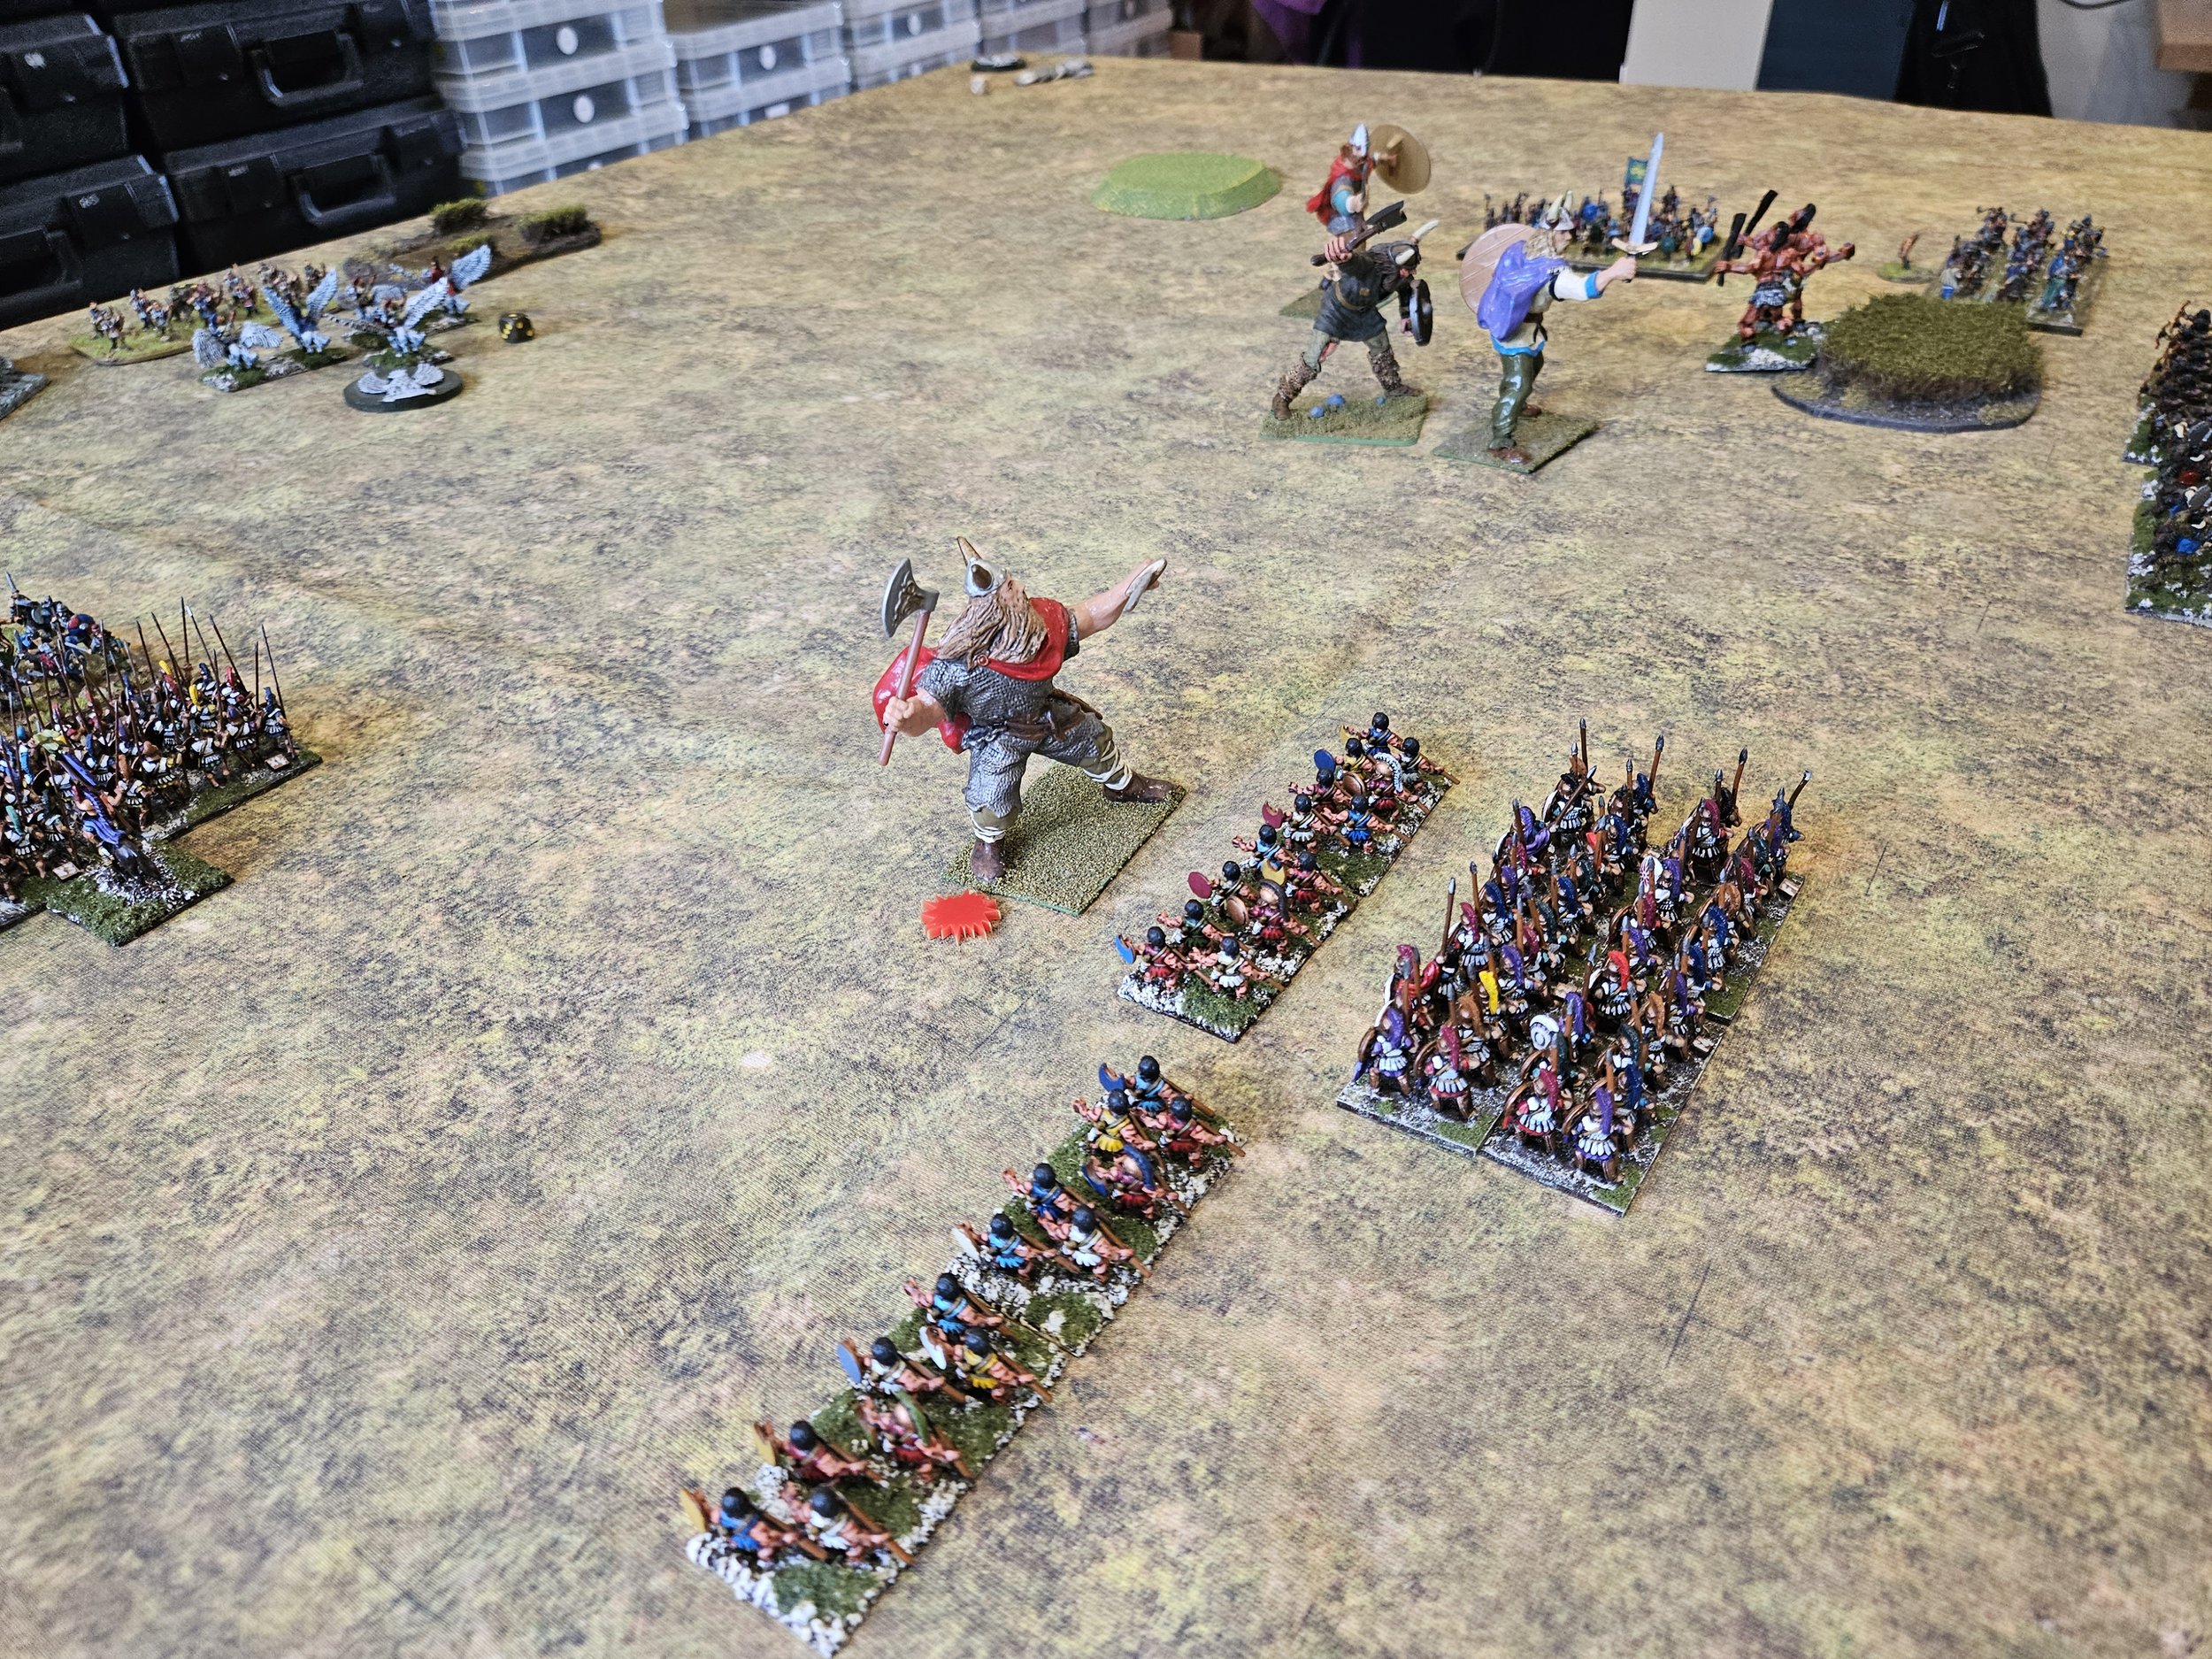  In the centre, helped by Poseidon, who now has some magic points back, the Hoplites have rallied and, aided by the psiloi, have started to fight back against the Jotun in the red cloak (who has just been hit by javelins from the lights). 